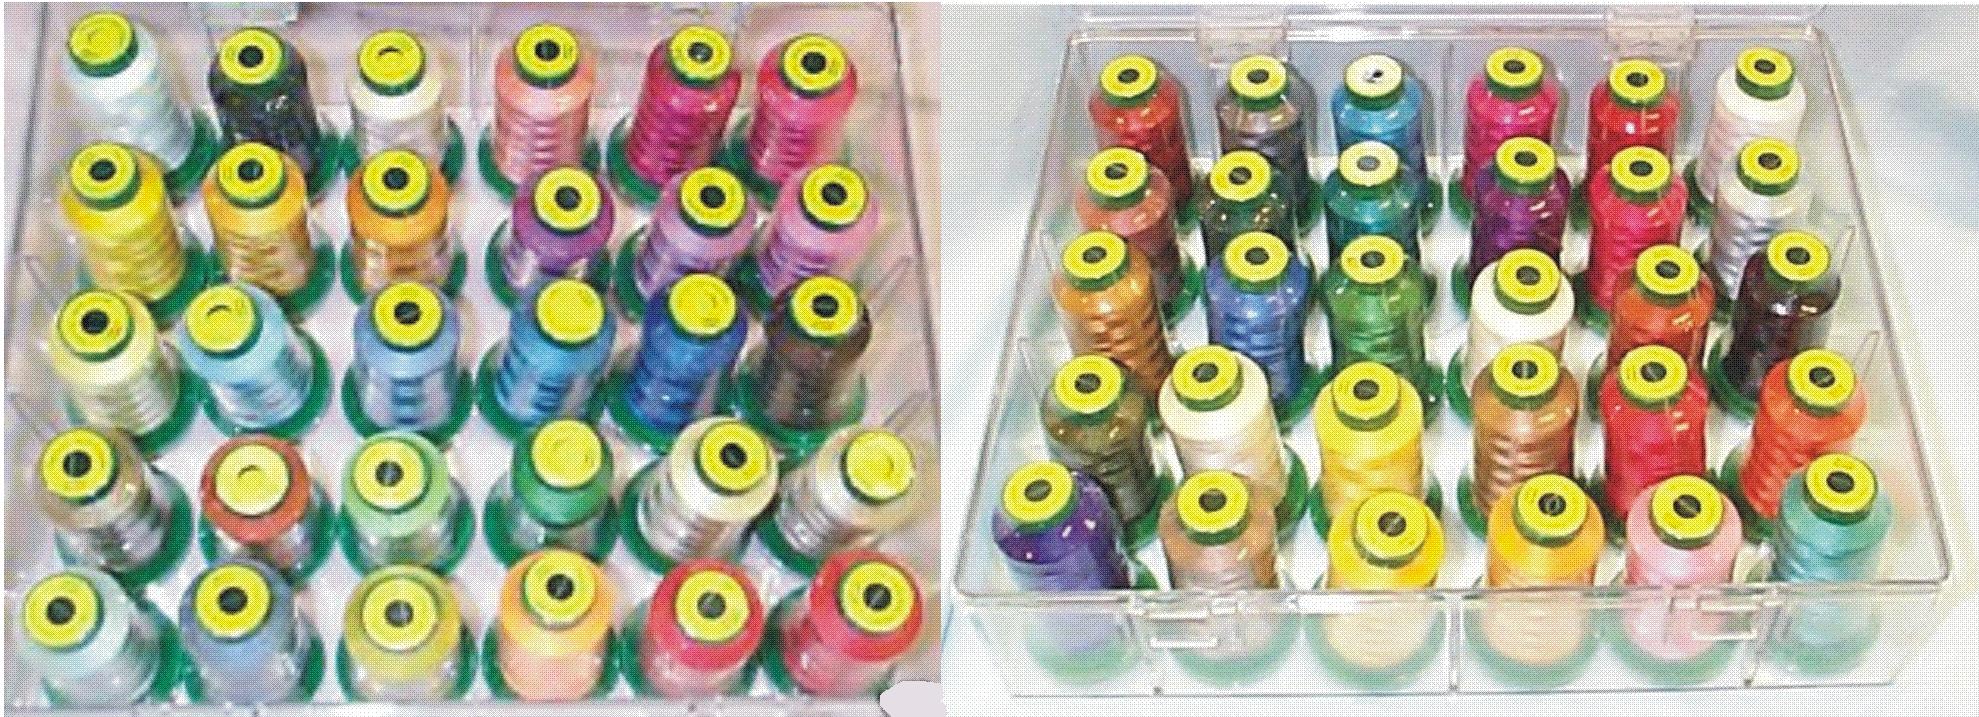 Exquisite 60 Disney Color Embroidery Thread Set (Box not included